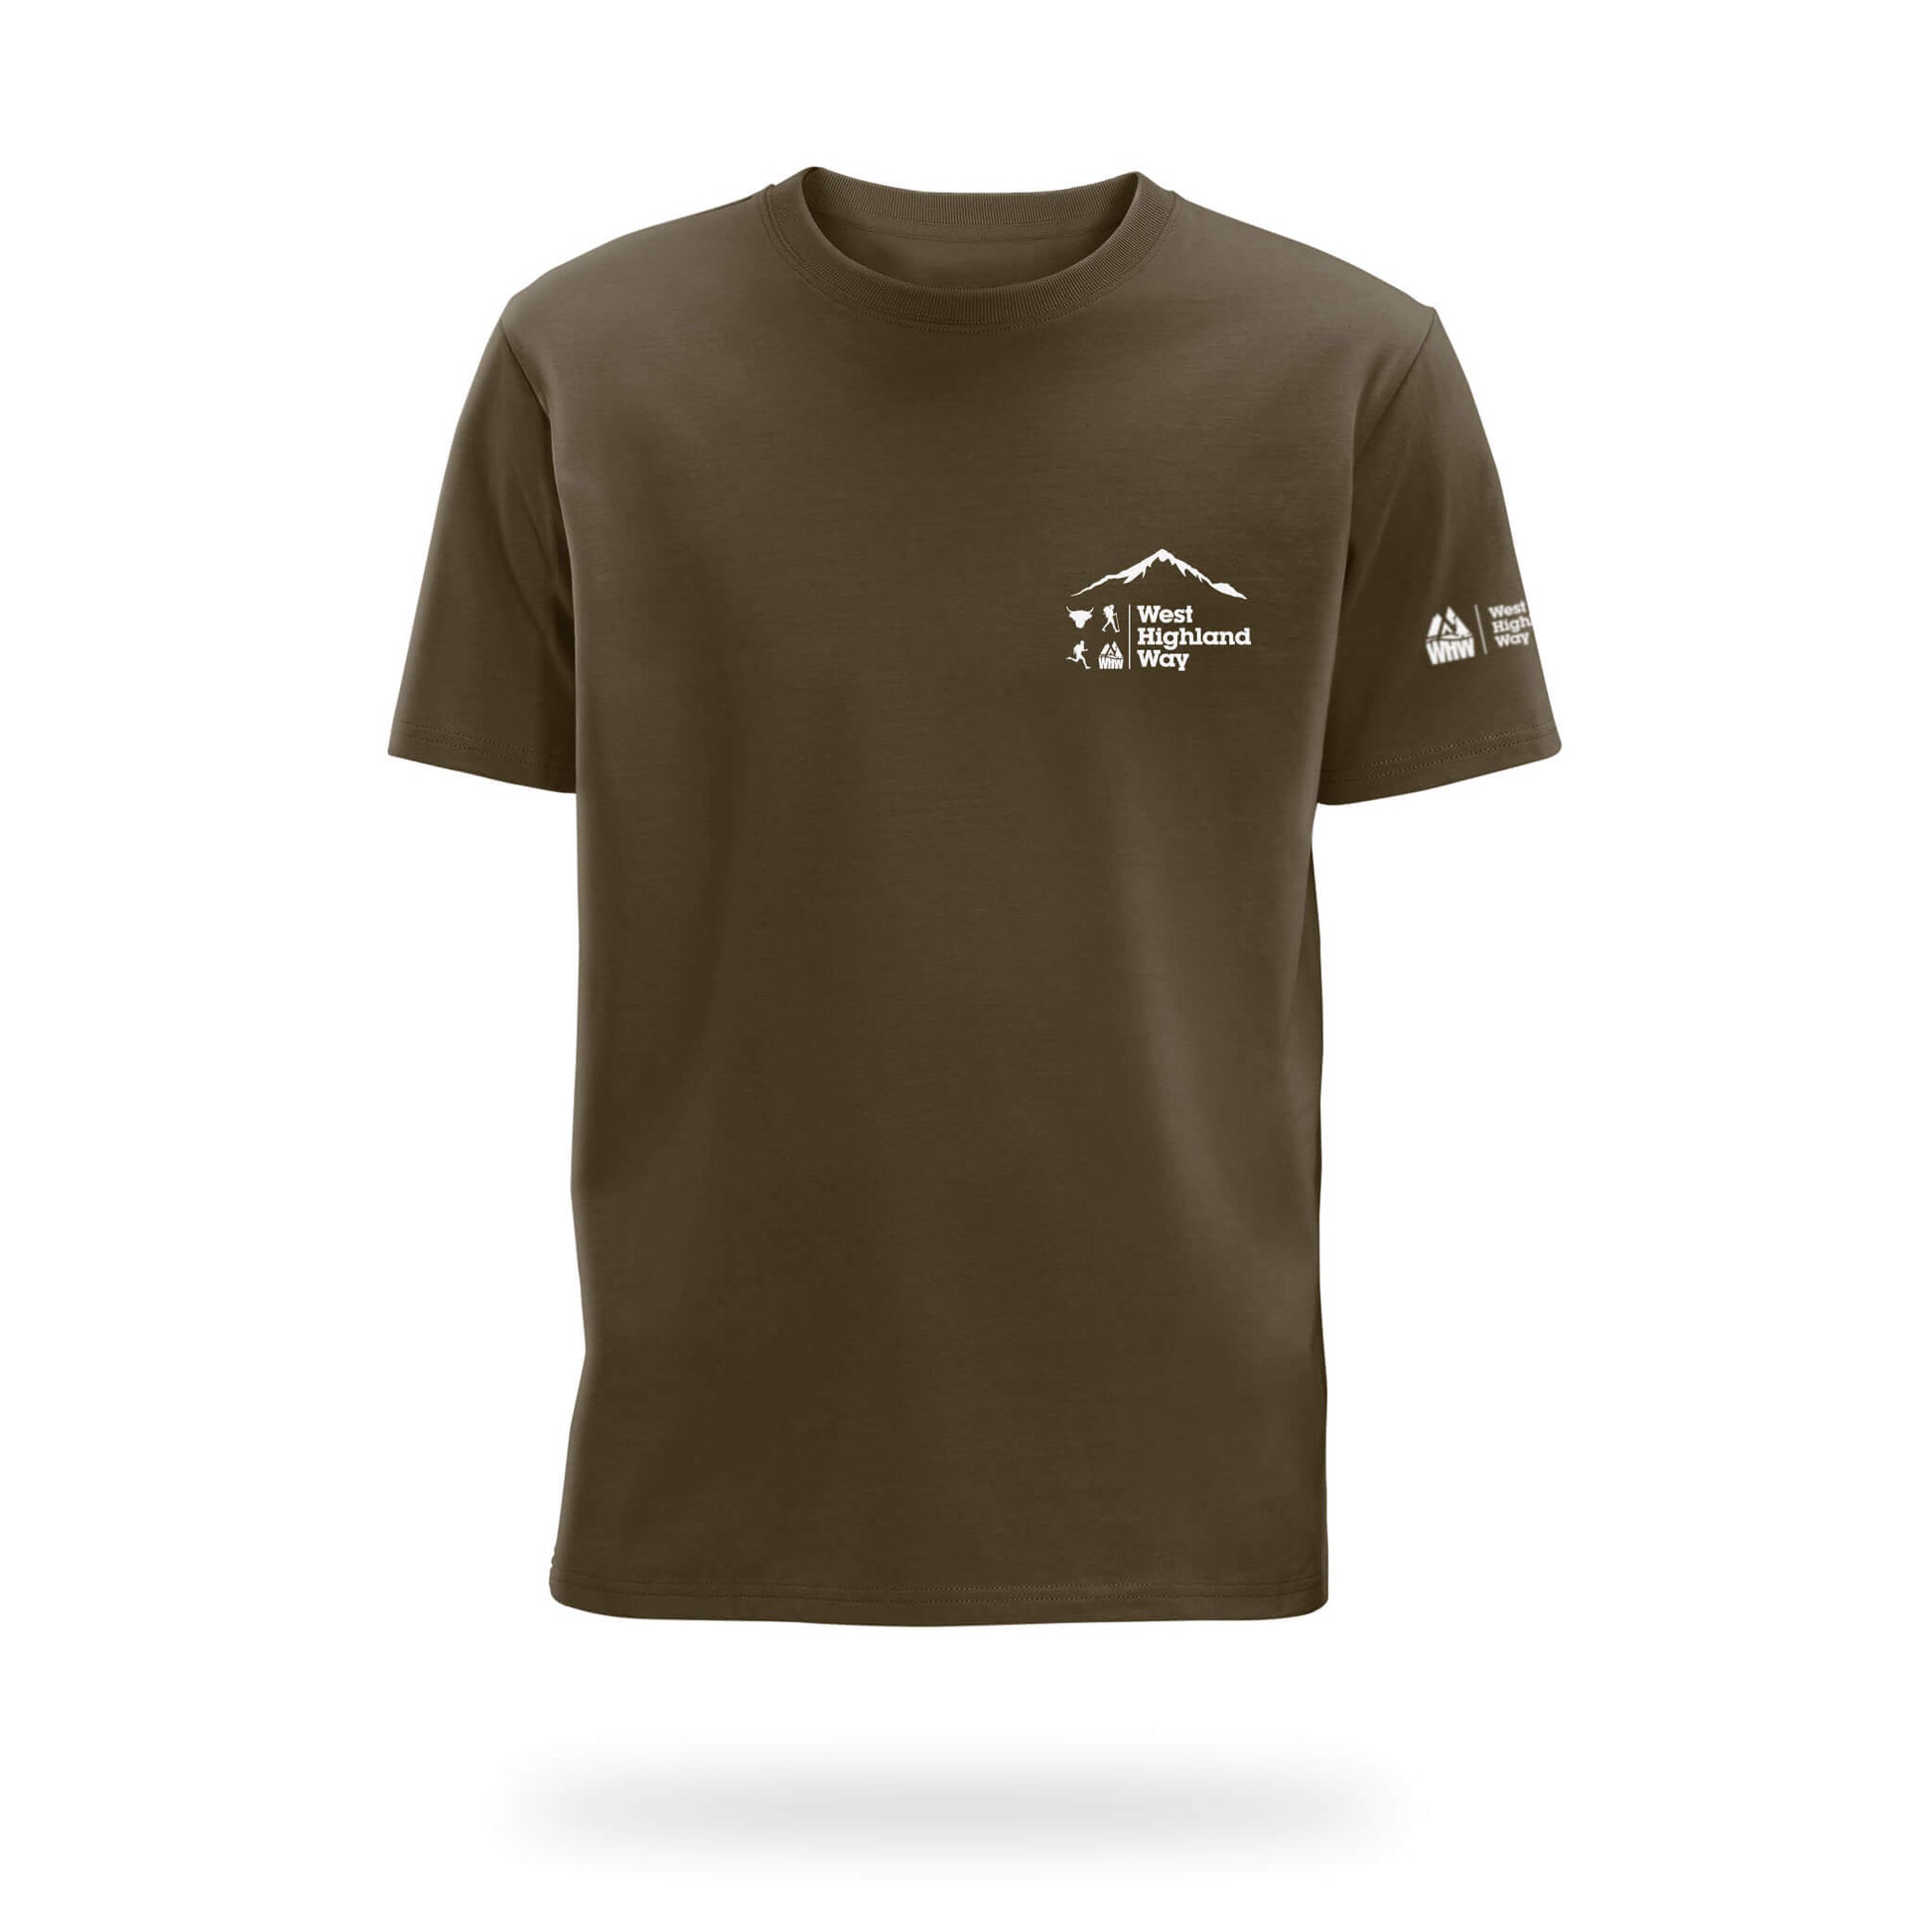 Brown Backpack T-Shirt showing Buachaille Etive Mor West Highland Way logo on left chest.